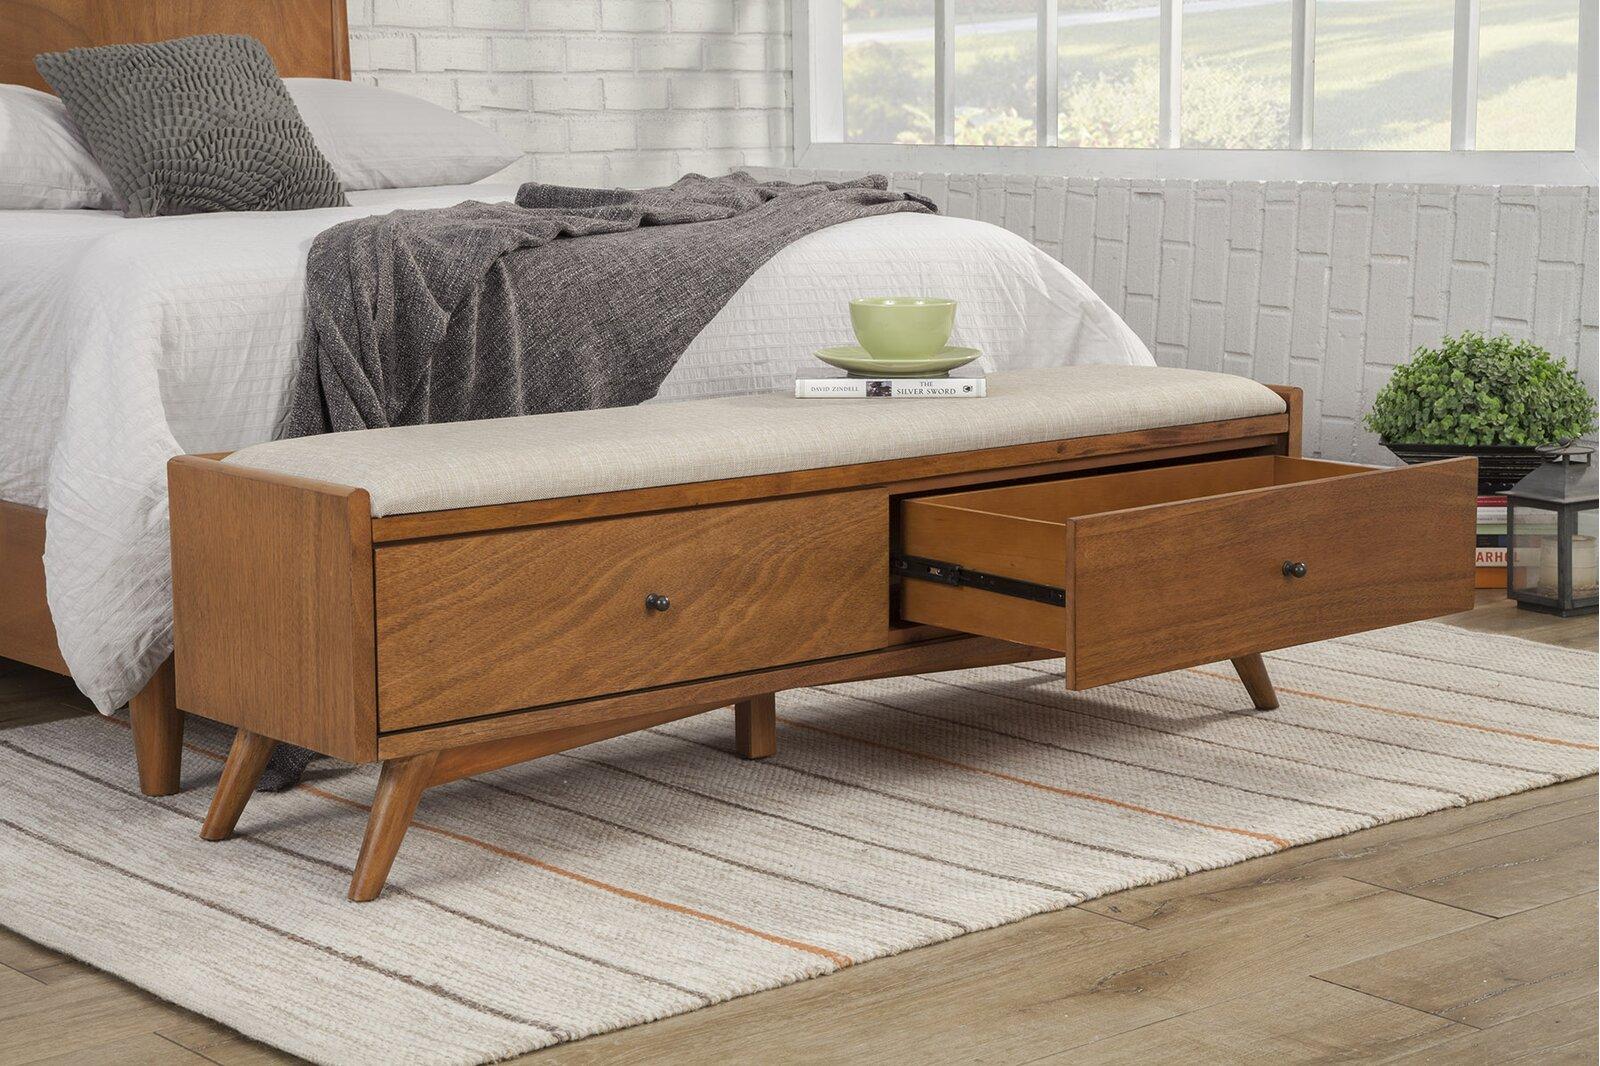 Seating In Style: Elevating Your Bedroom With The Bedbench Elegance